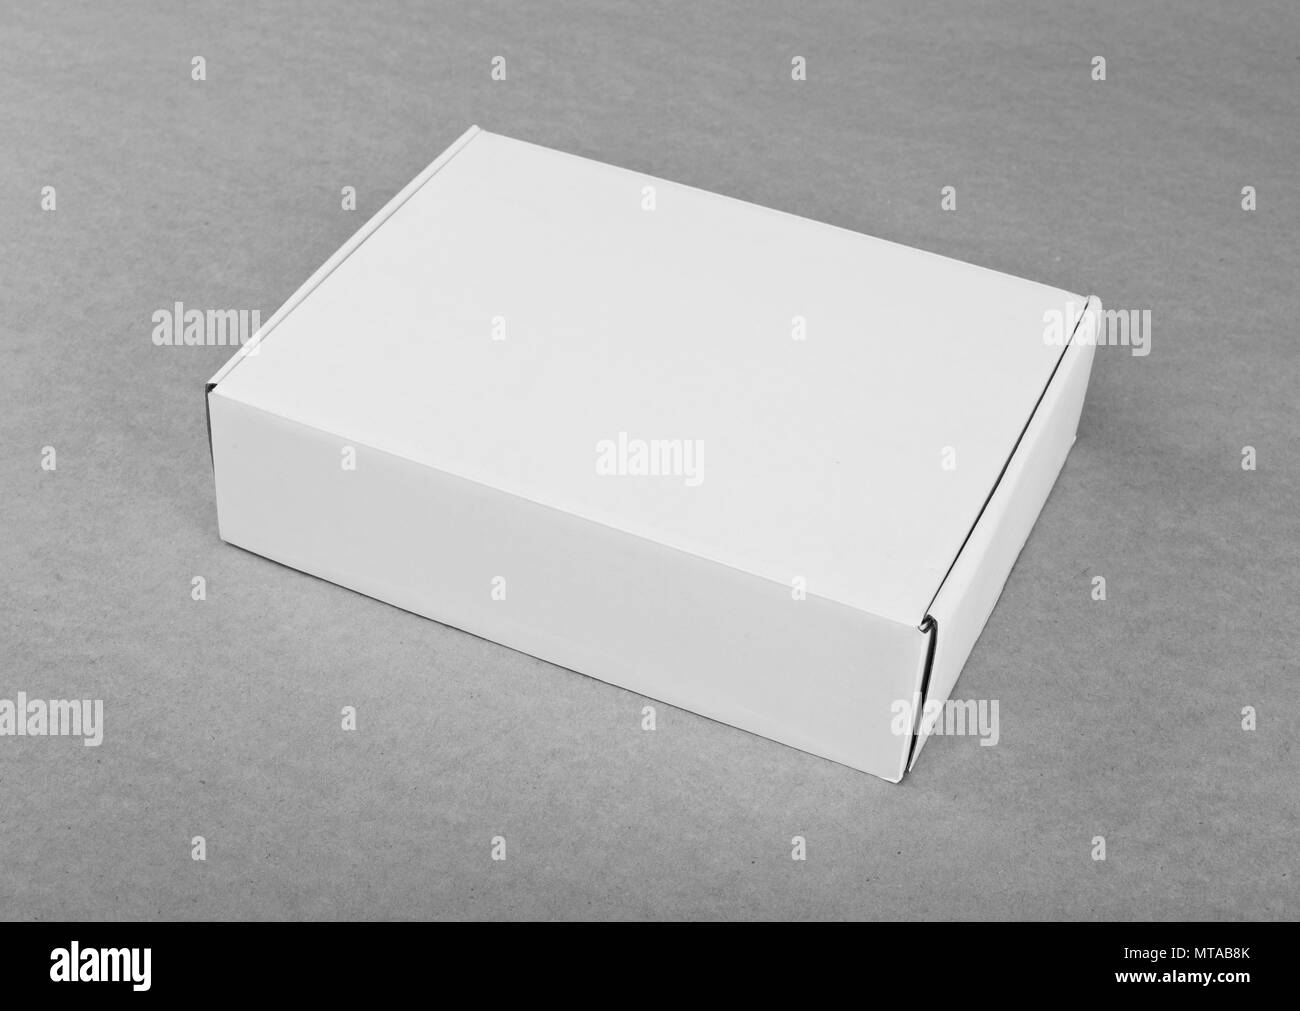 Box of merch or merchandise delivery box square cardboard box Black and ...